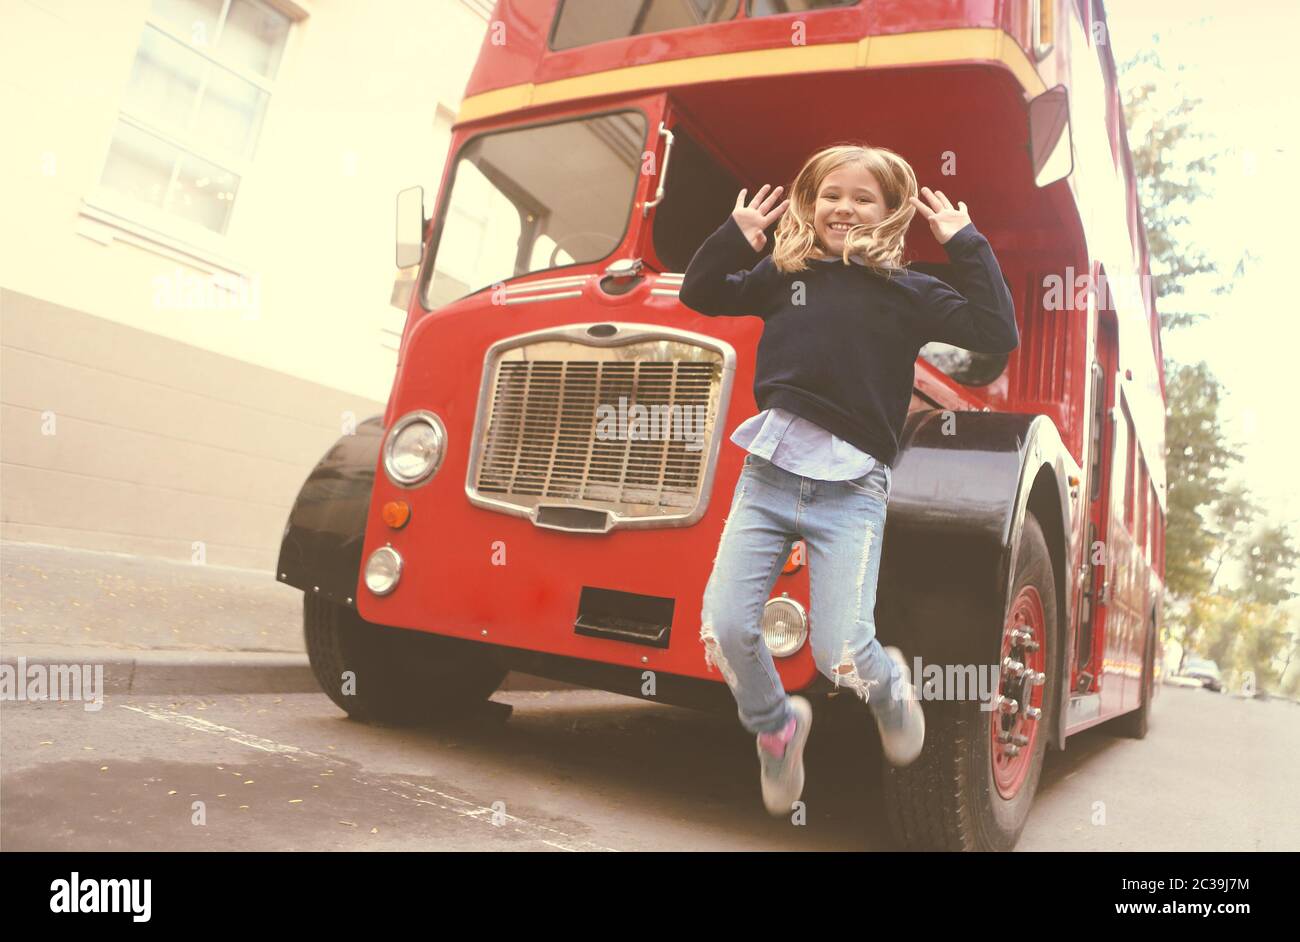 Preteen girl by the red bus Stock Photo